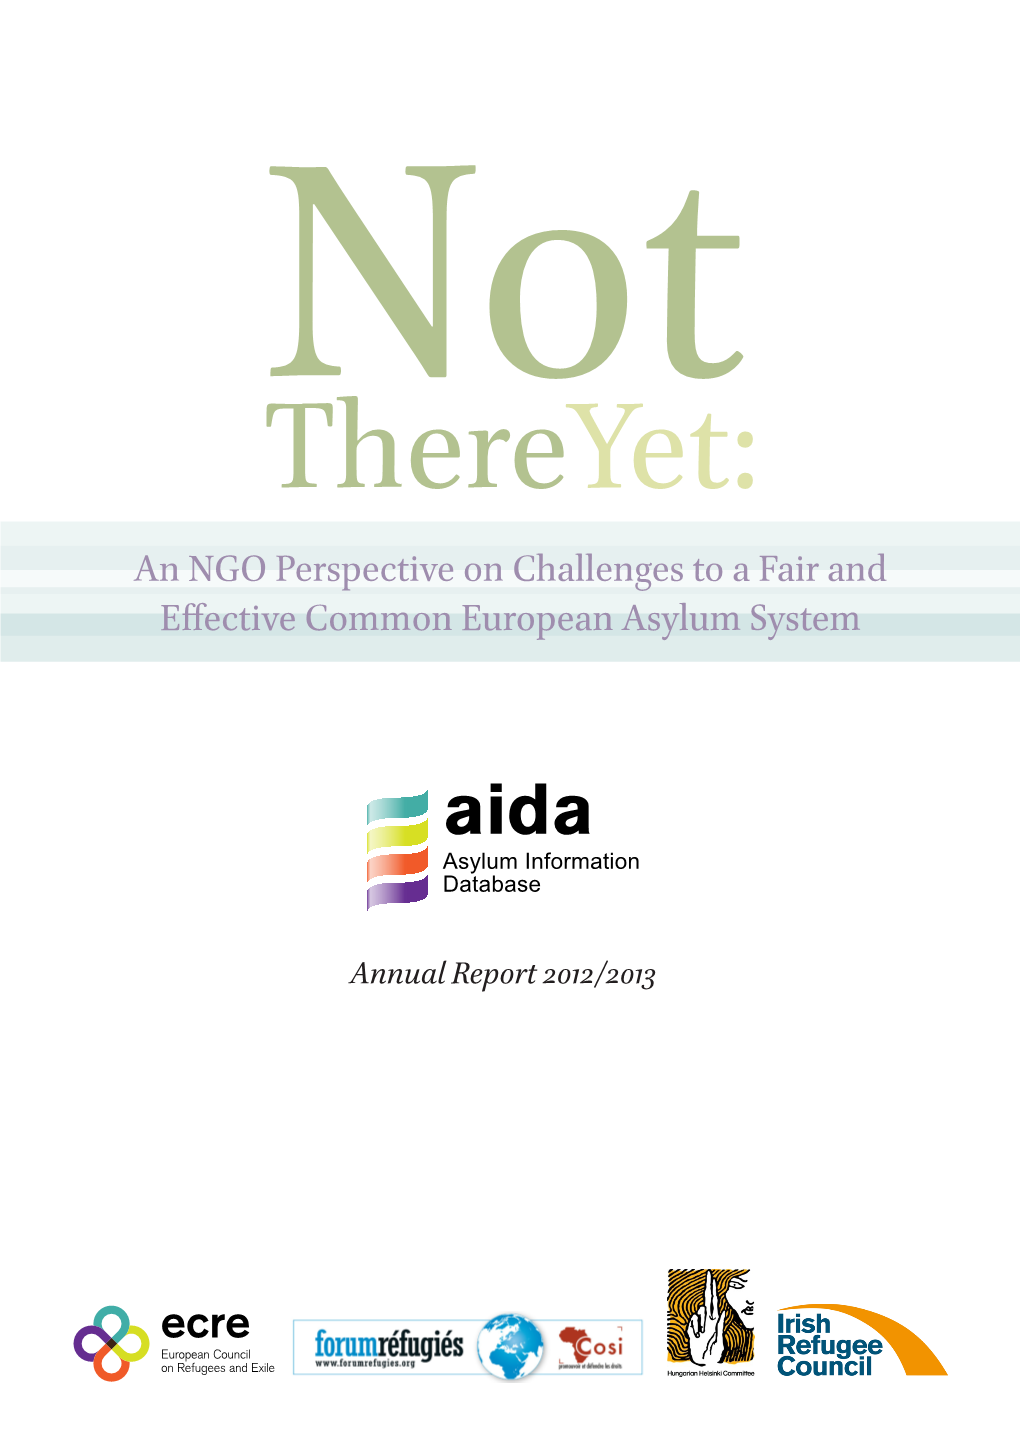 An NGO Perspective on Challenges to a Fair and Effective Common European Asylum System